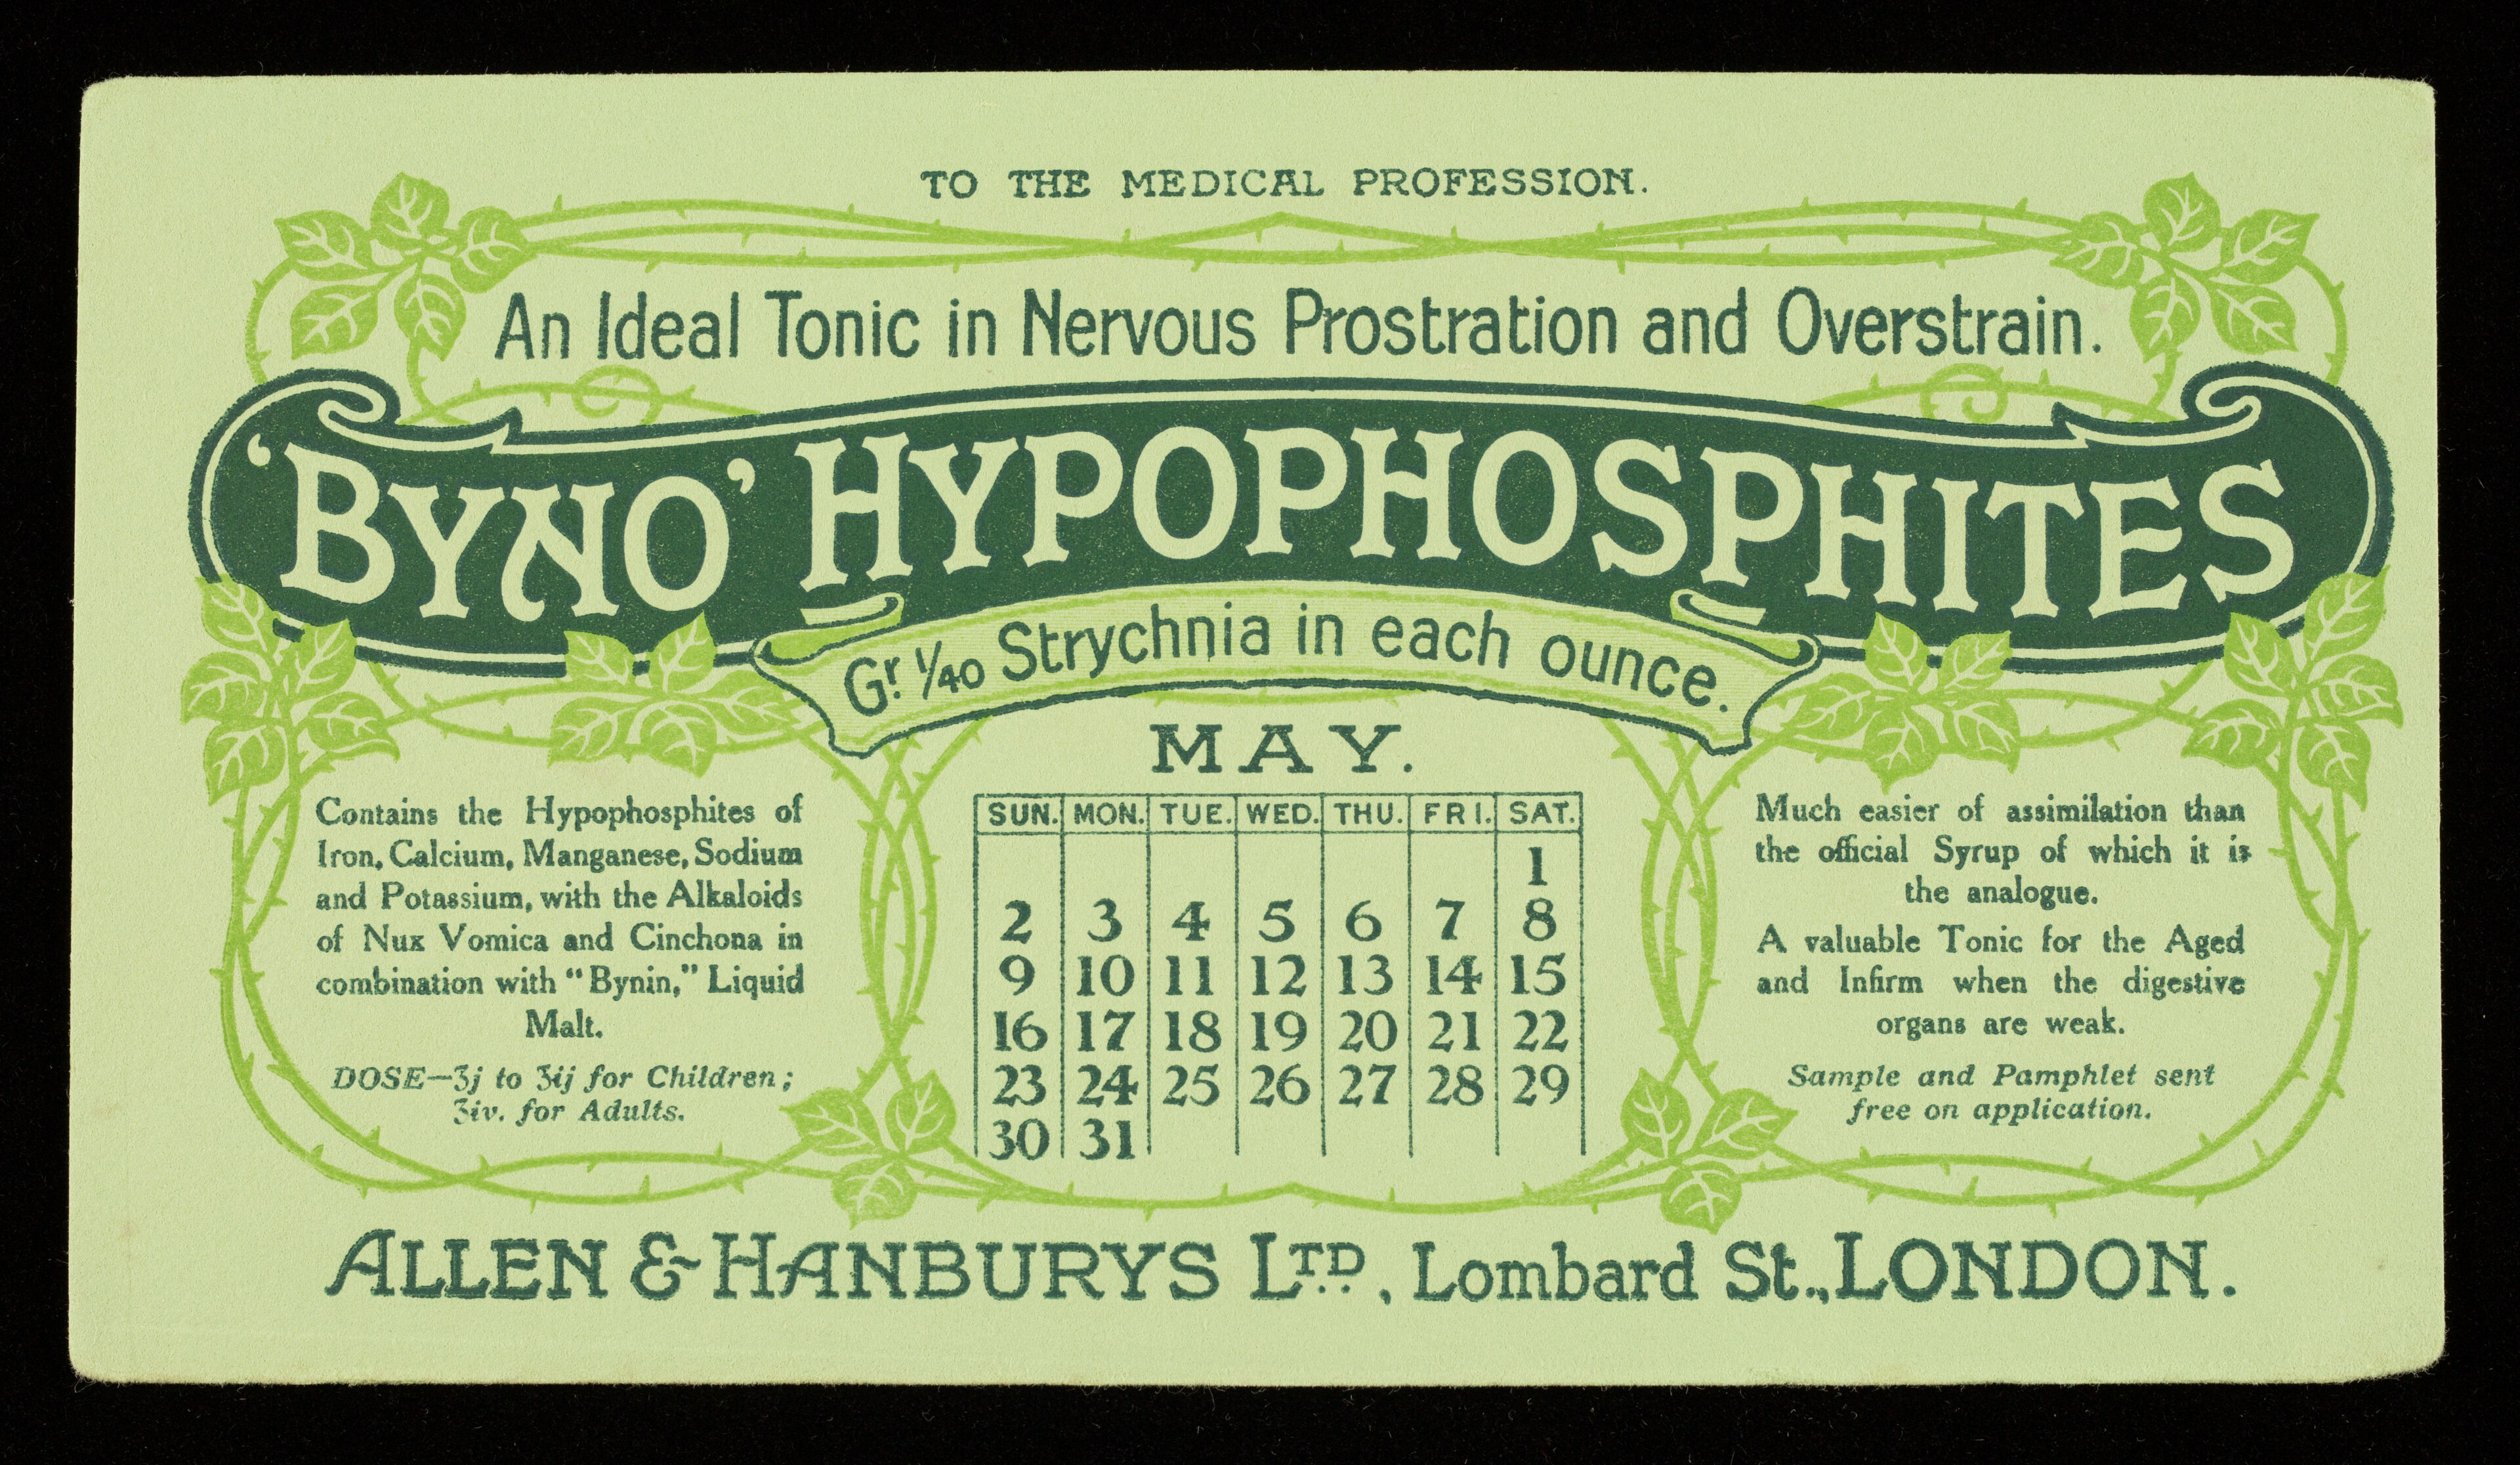 'Byno' hypophosphates : an ideal tonic in nervous prostration and overstrain / Allen & Hanburys Ltd.